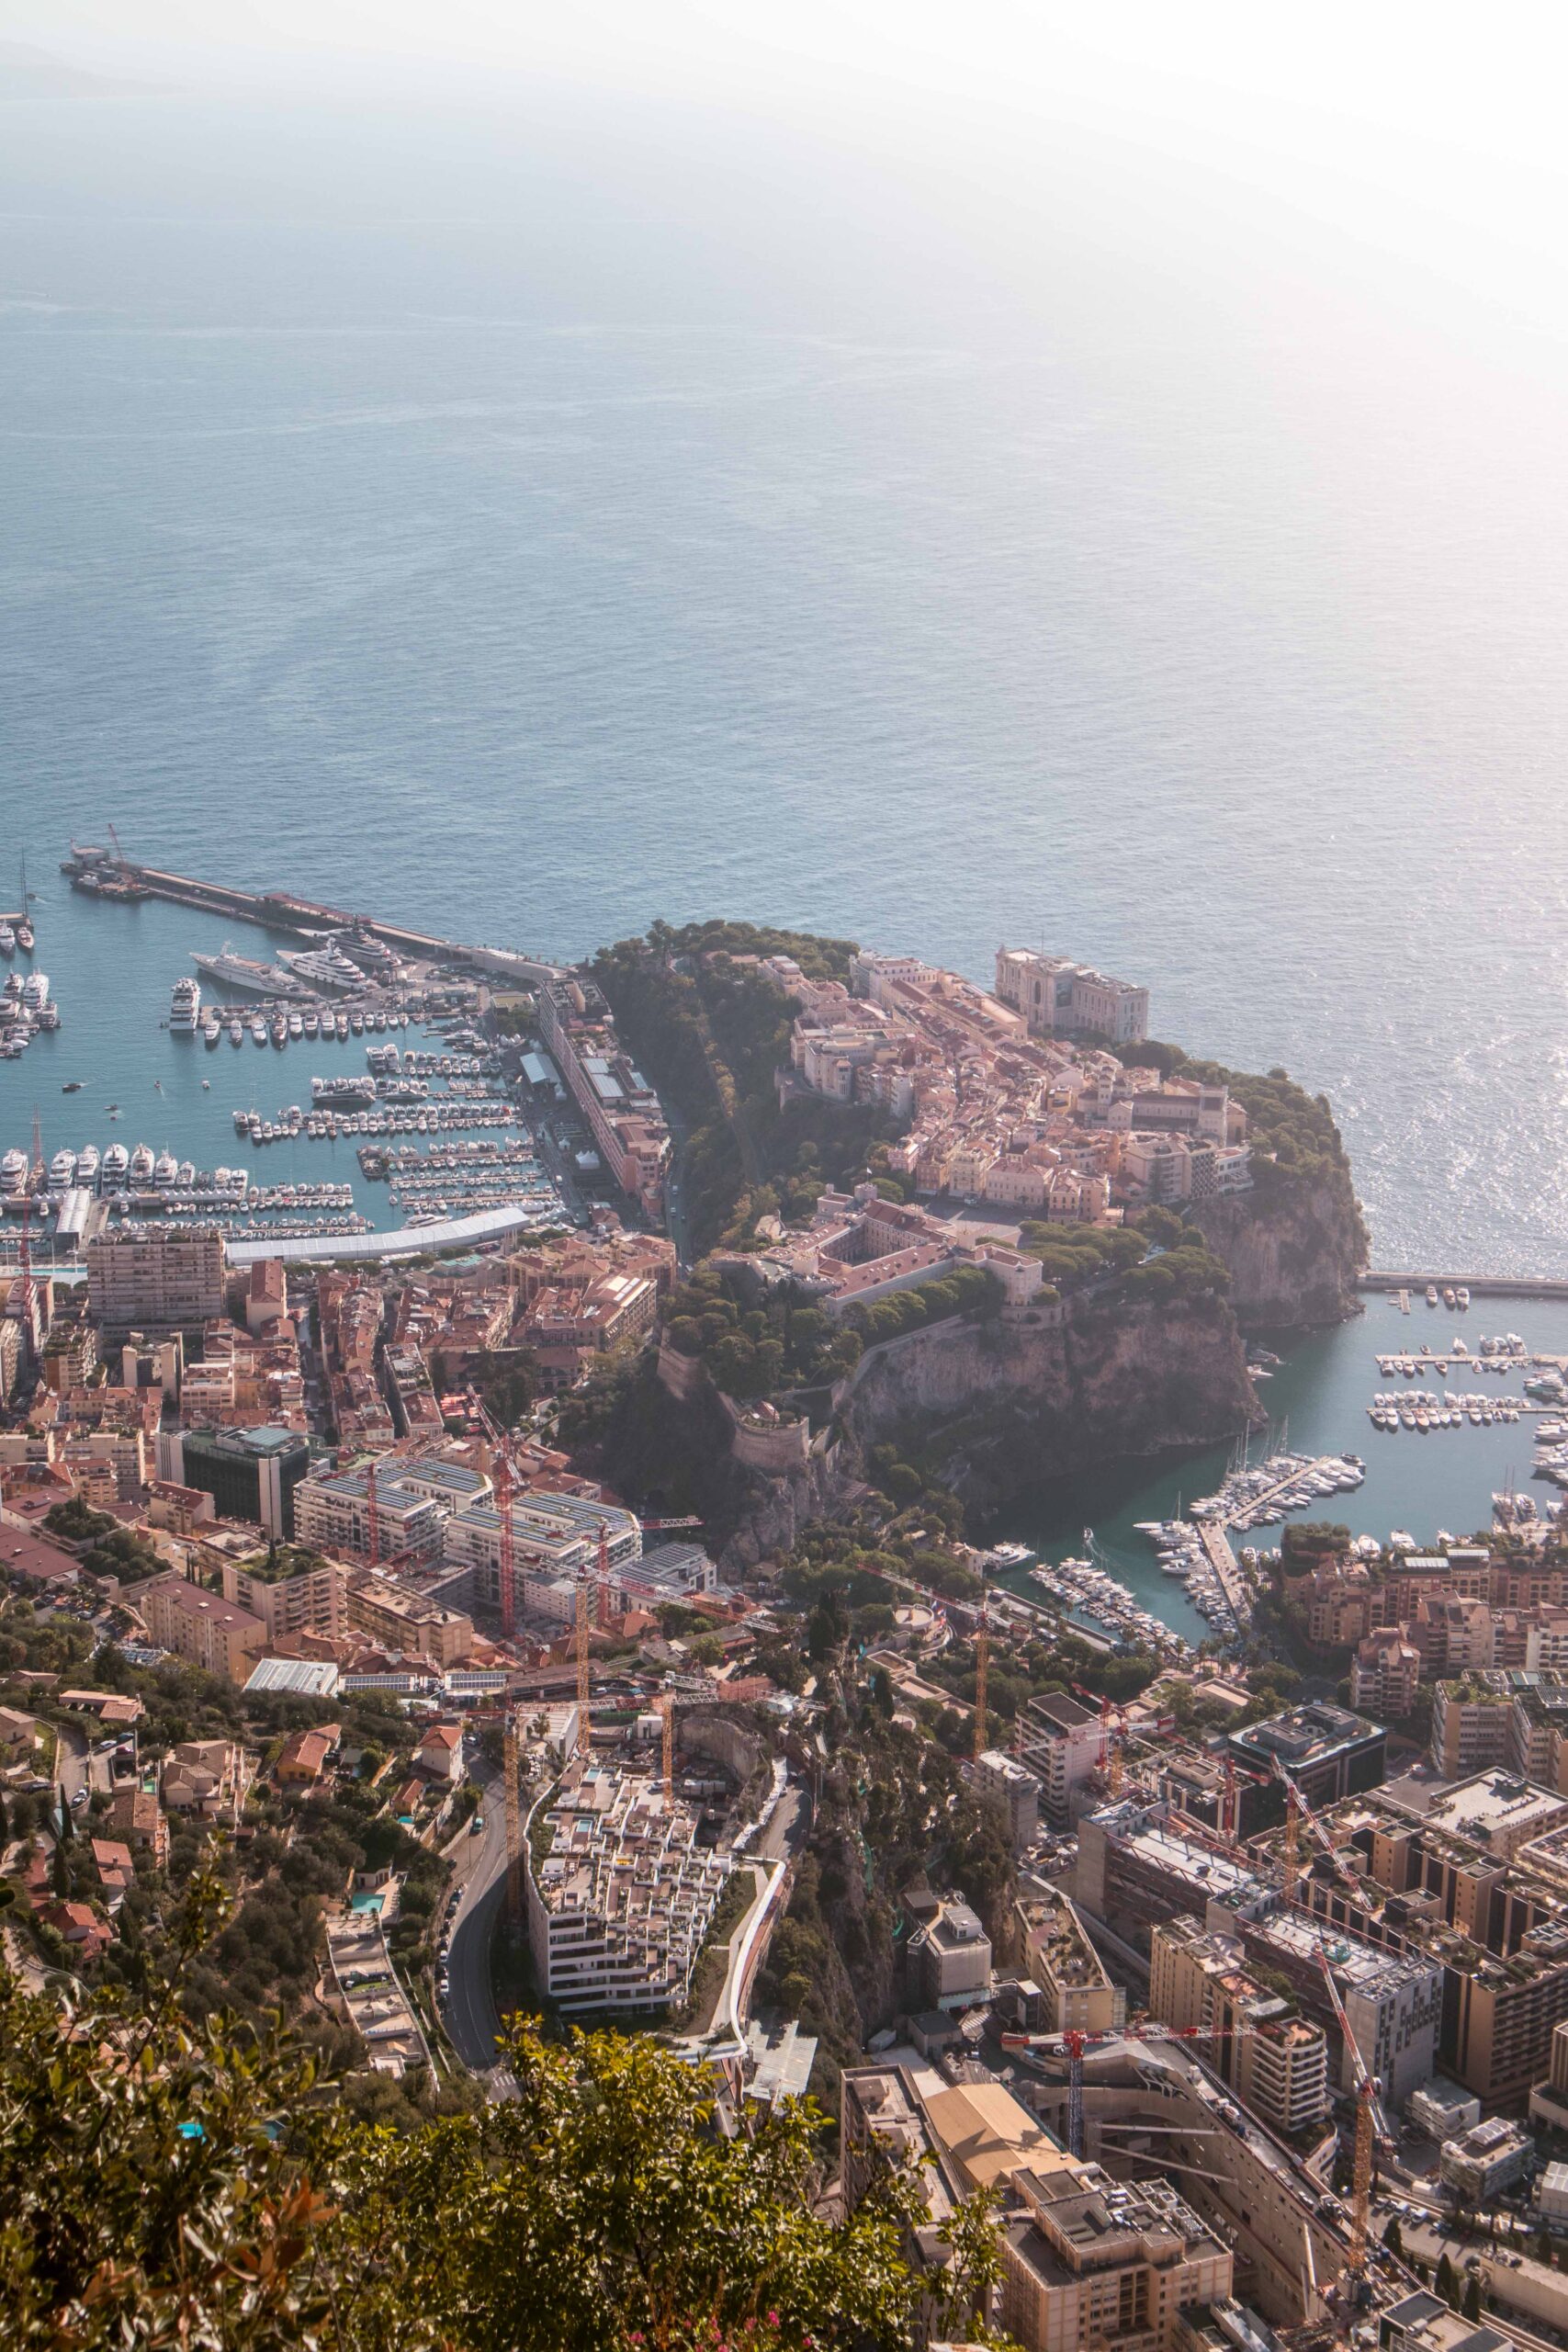 Above view of "The Rock" ("Le Rocher"), the Fontivielle Port and the Hercule Port of Monaco as seen from the Tête de Chien rock promontory viewpoint near La Turbie Village, France